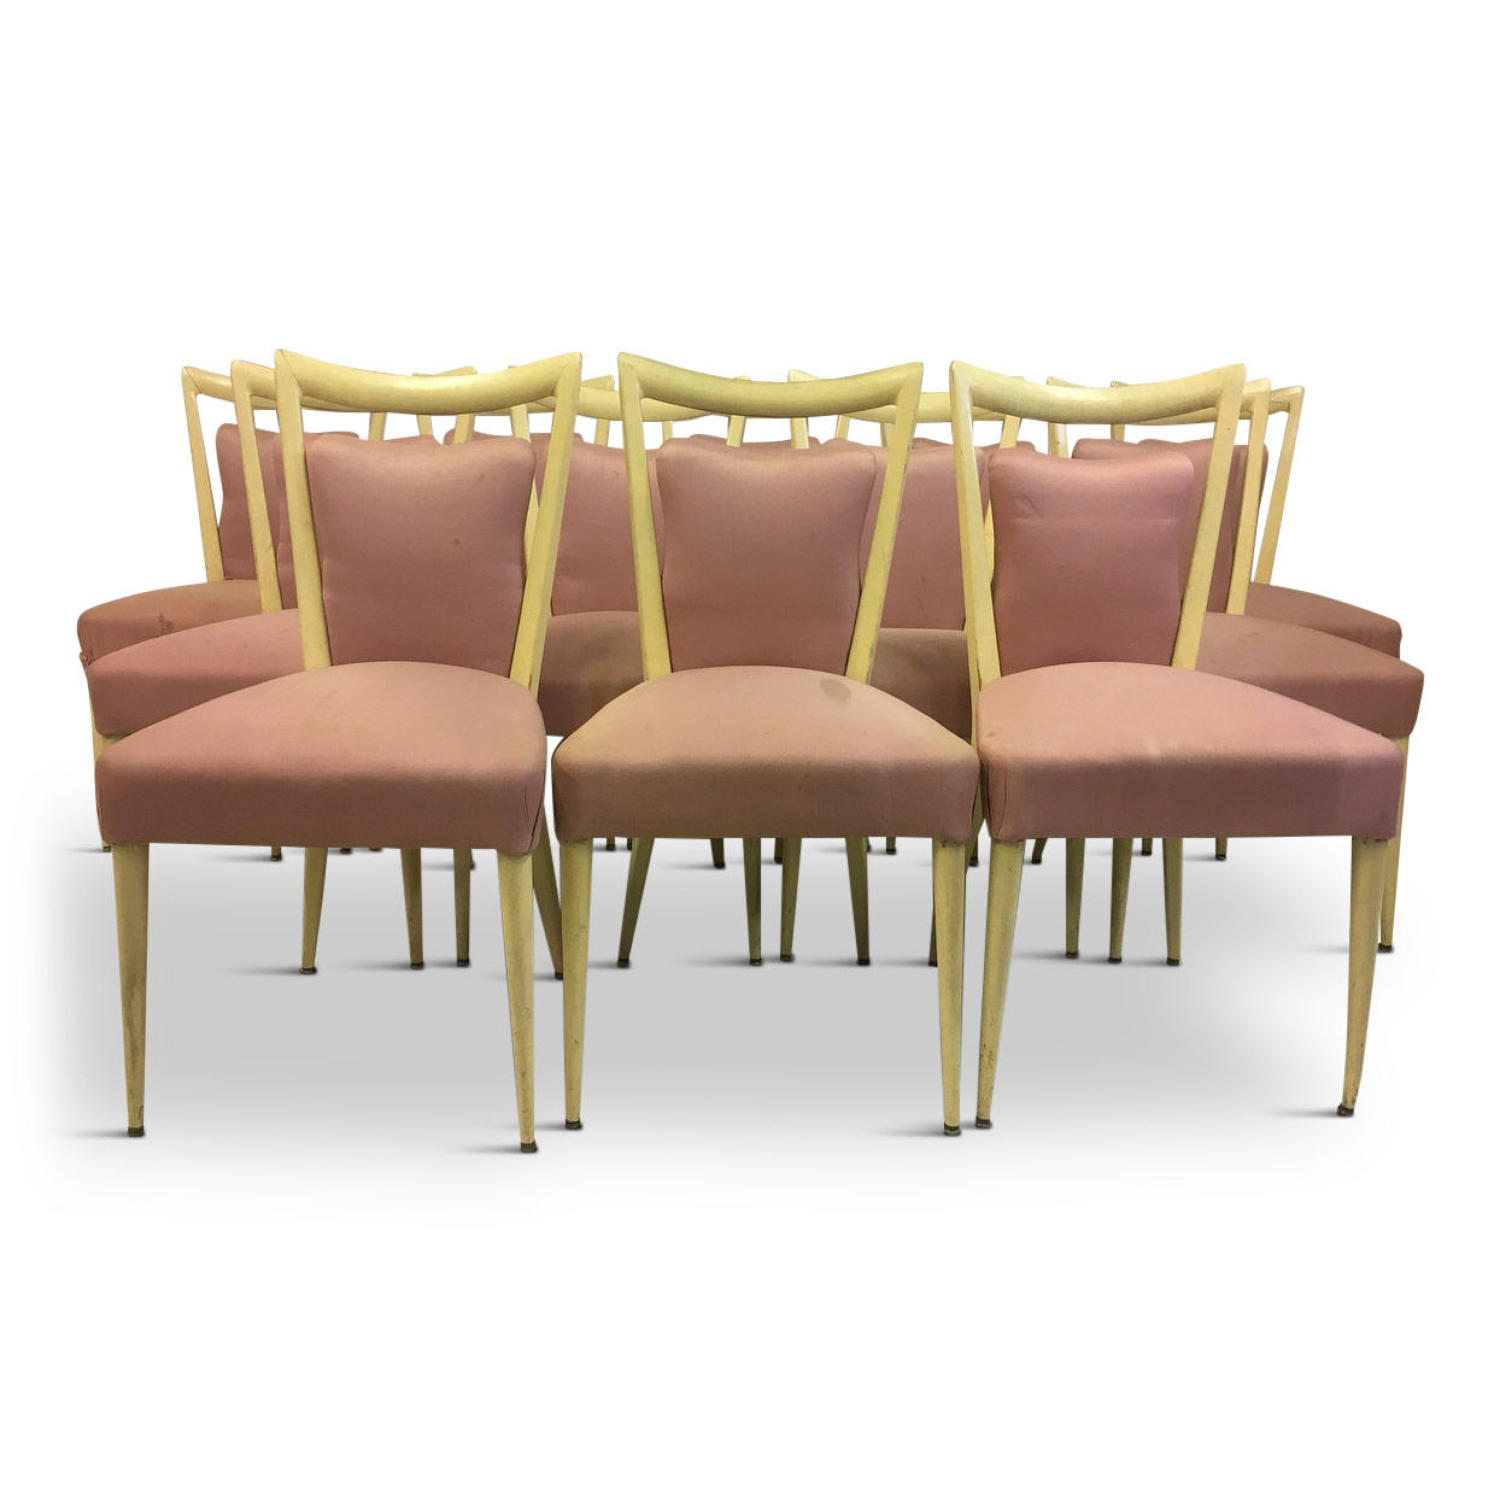 A set of twelve Italian dining chairs by Melchiorre Bega